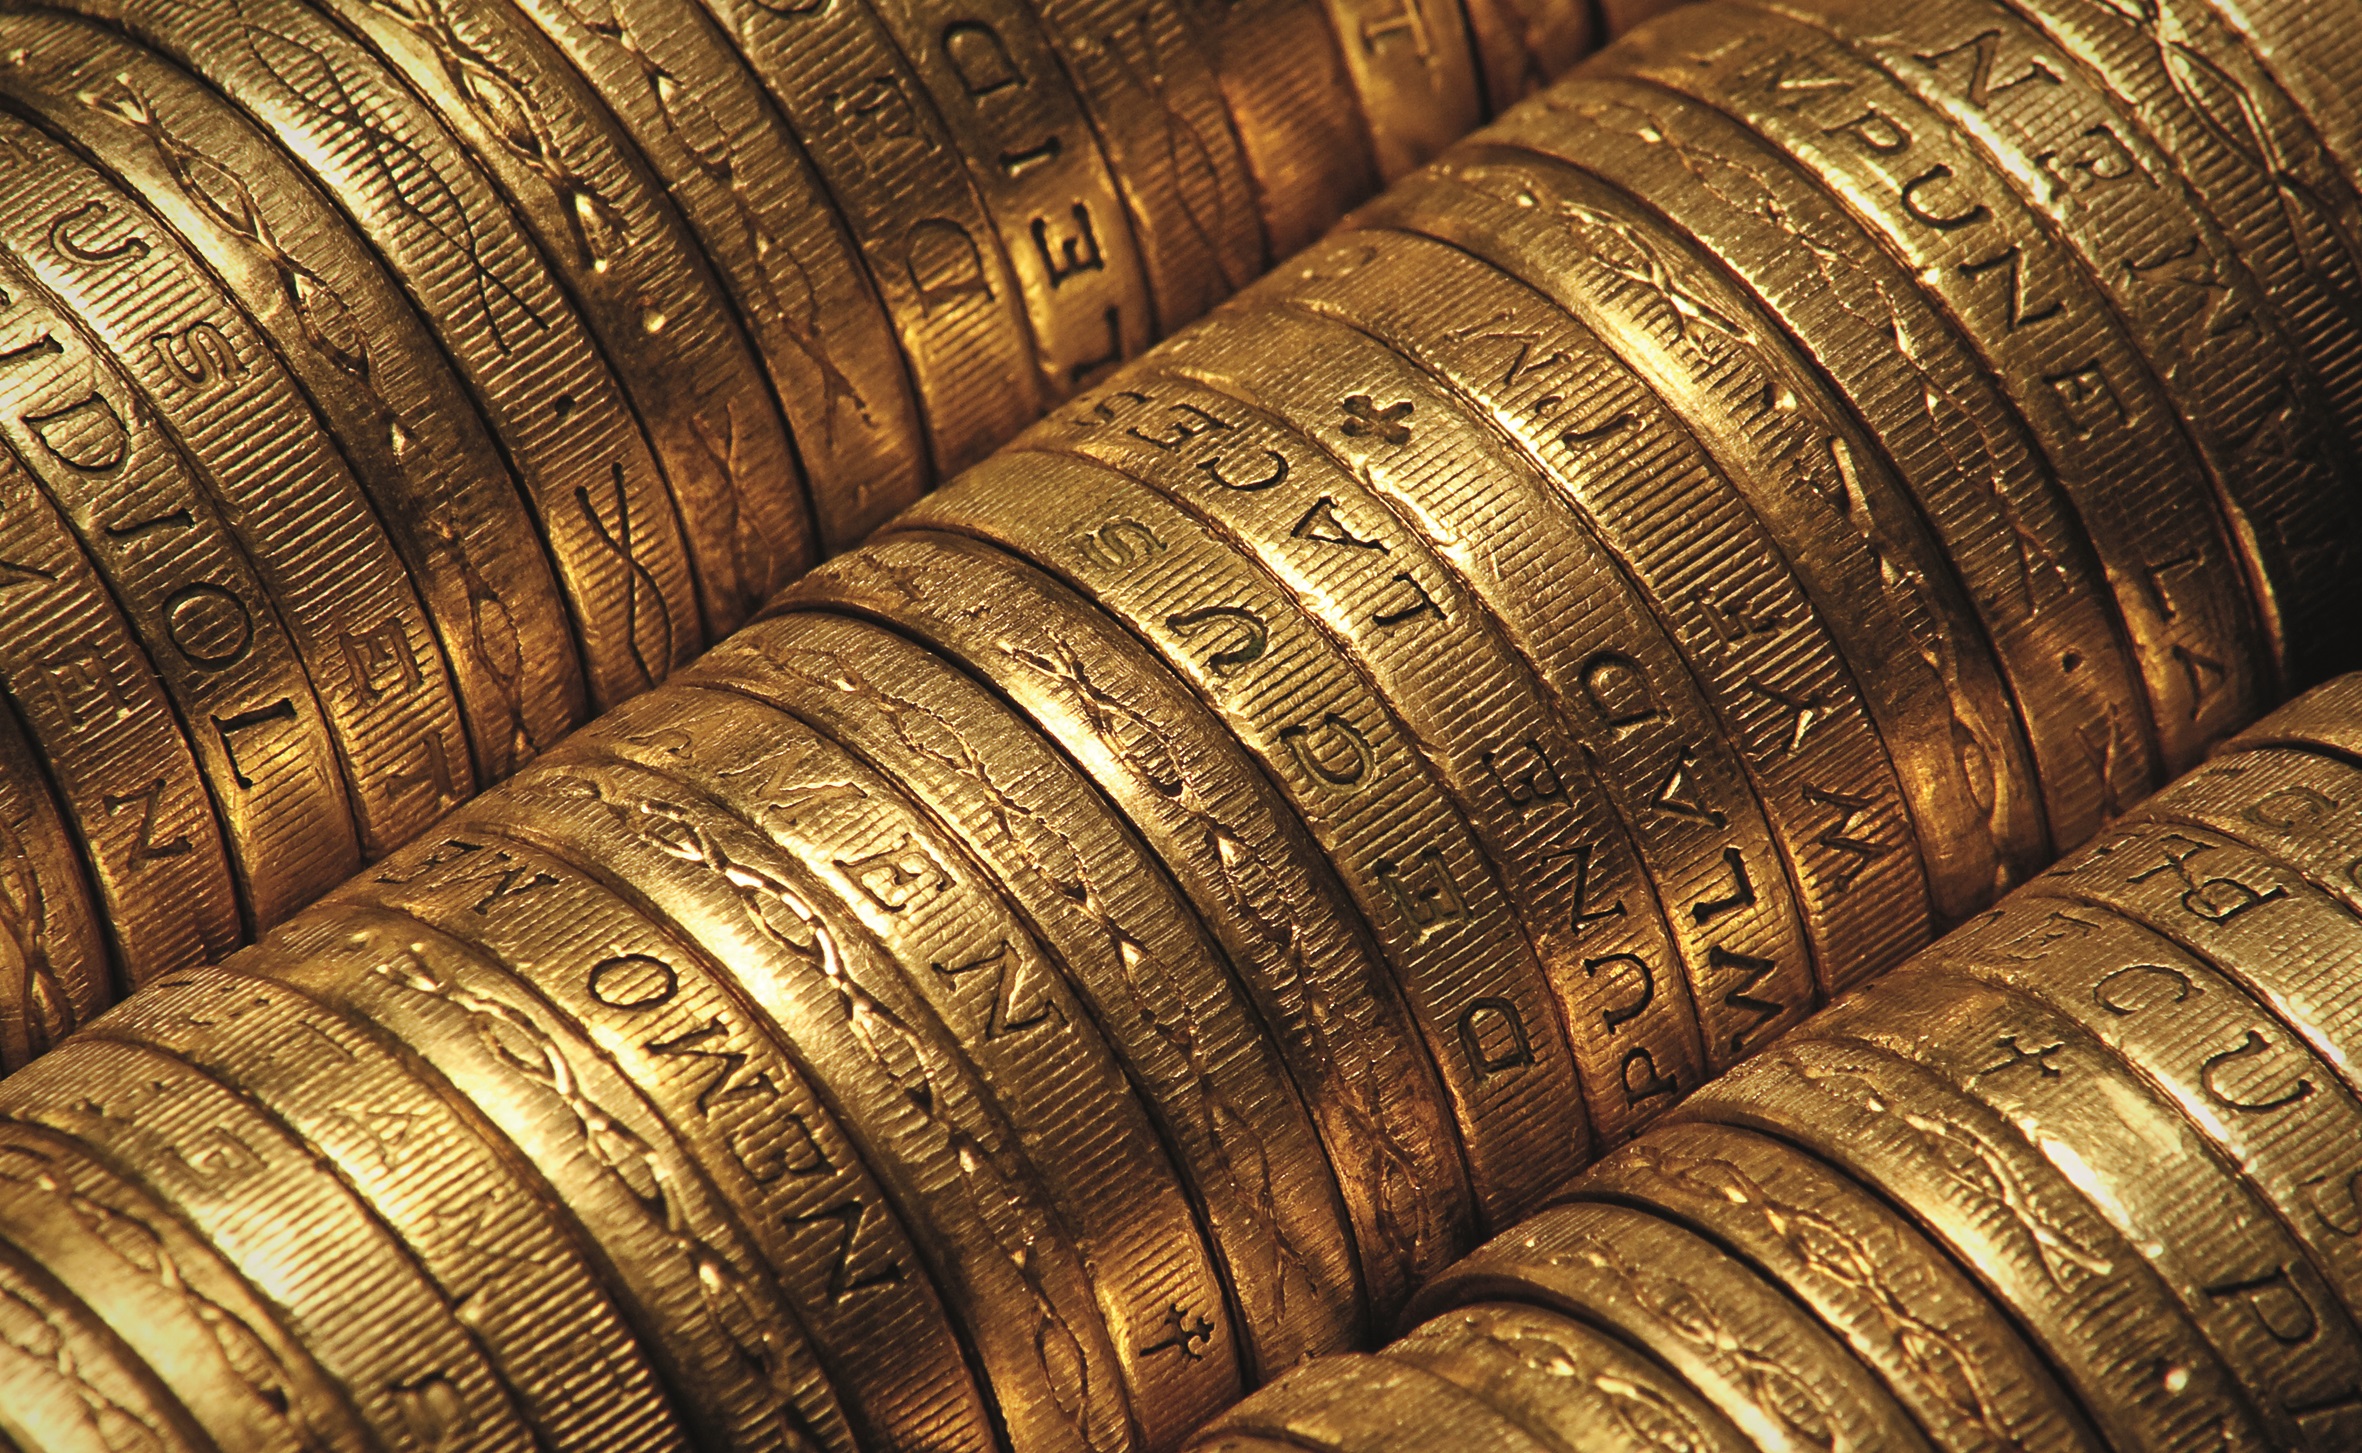 p18 British pound coins lined up - Shutterstock - open use.jpg